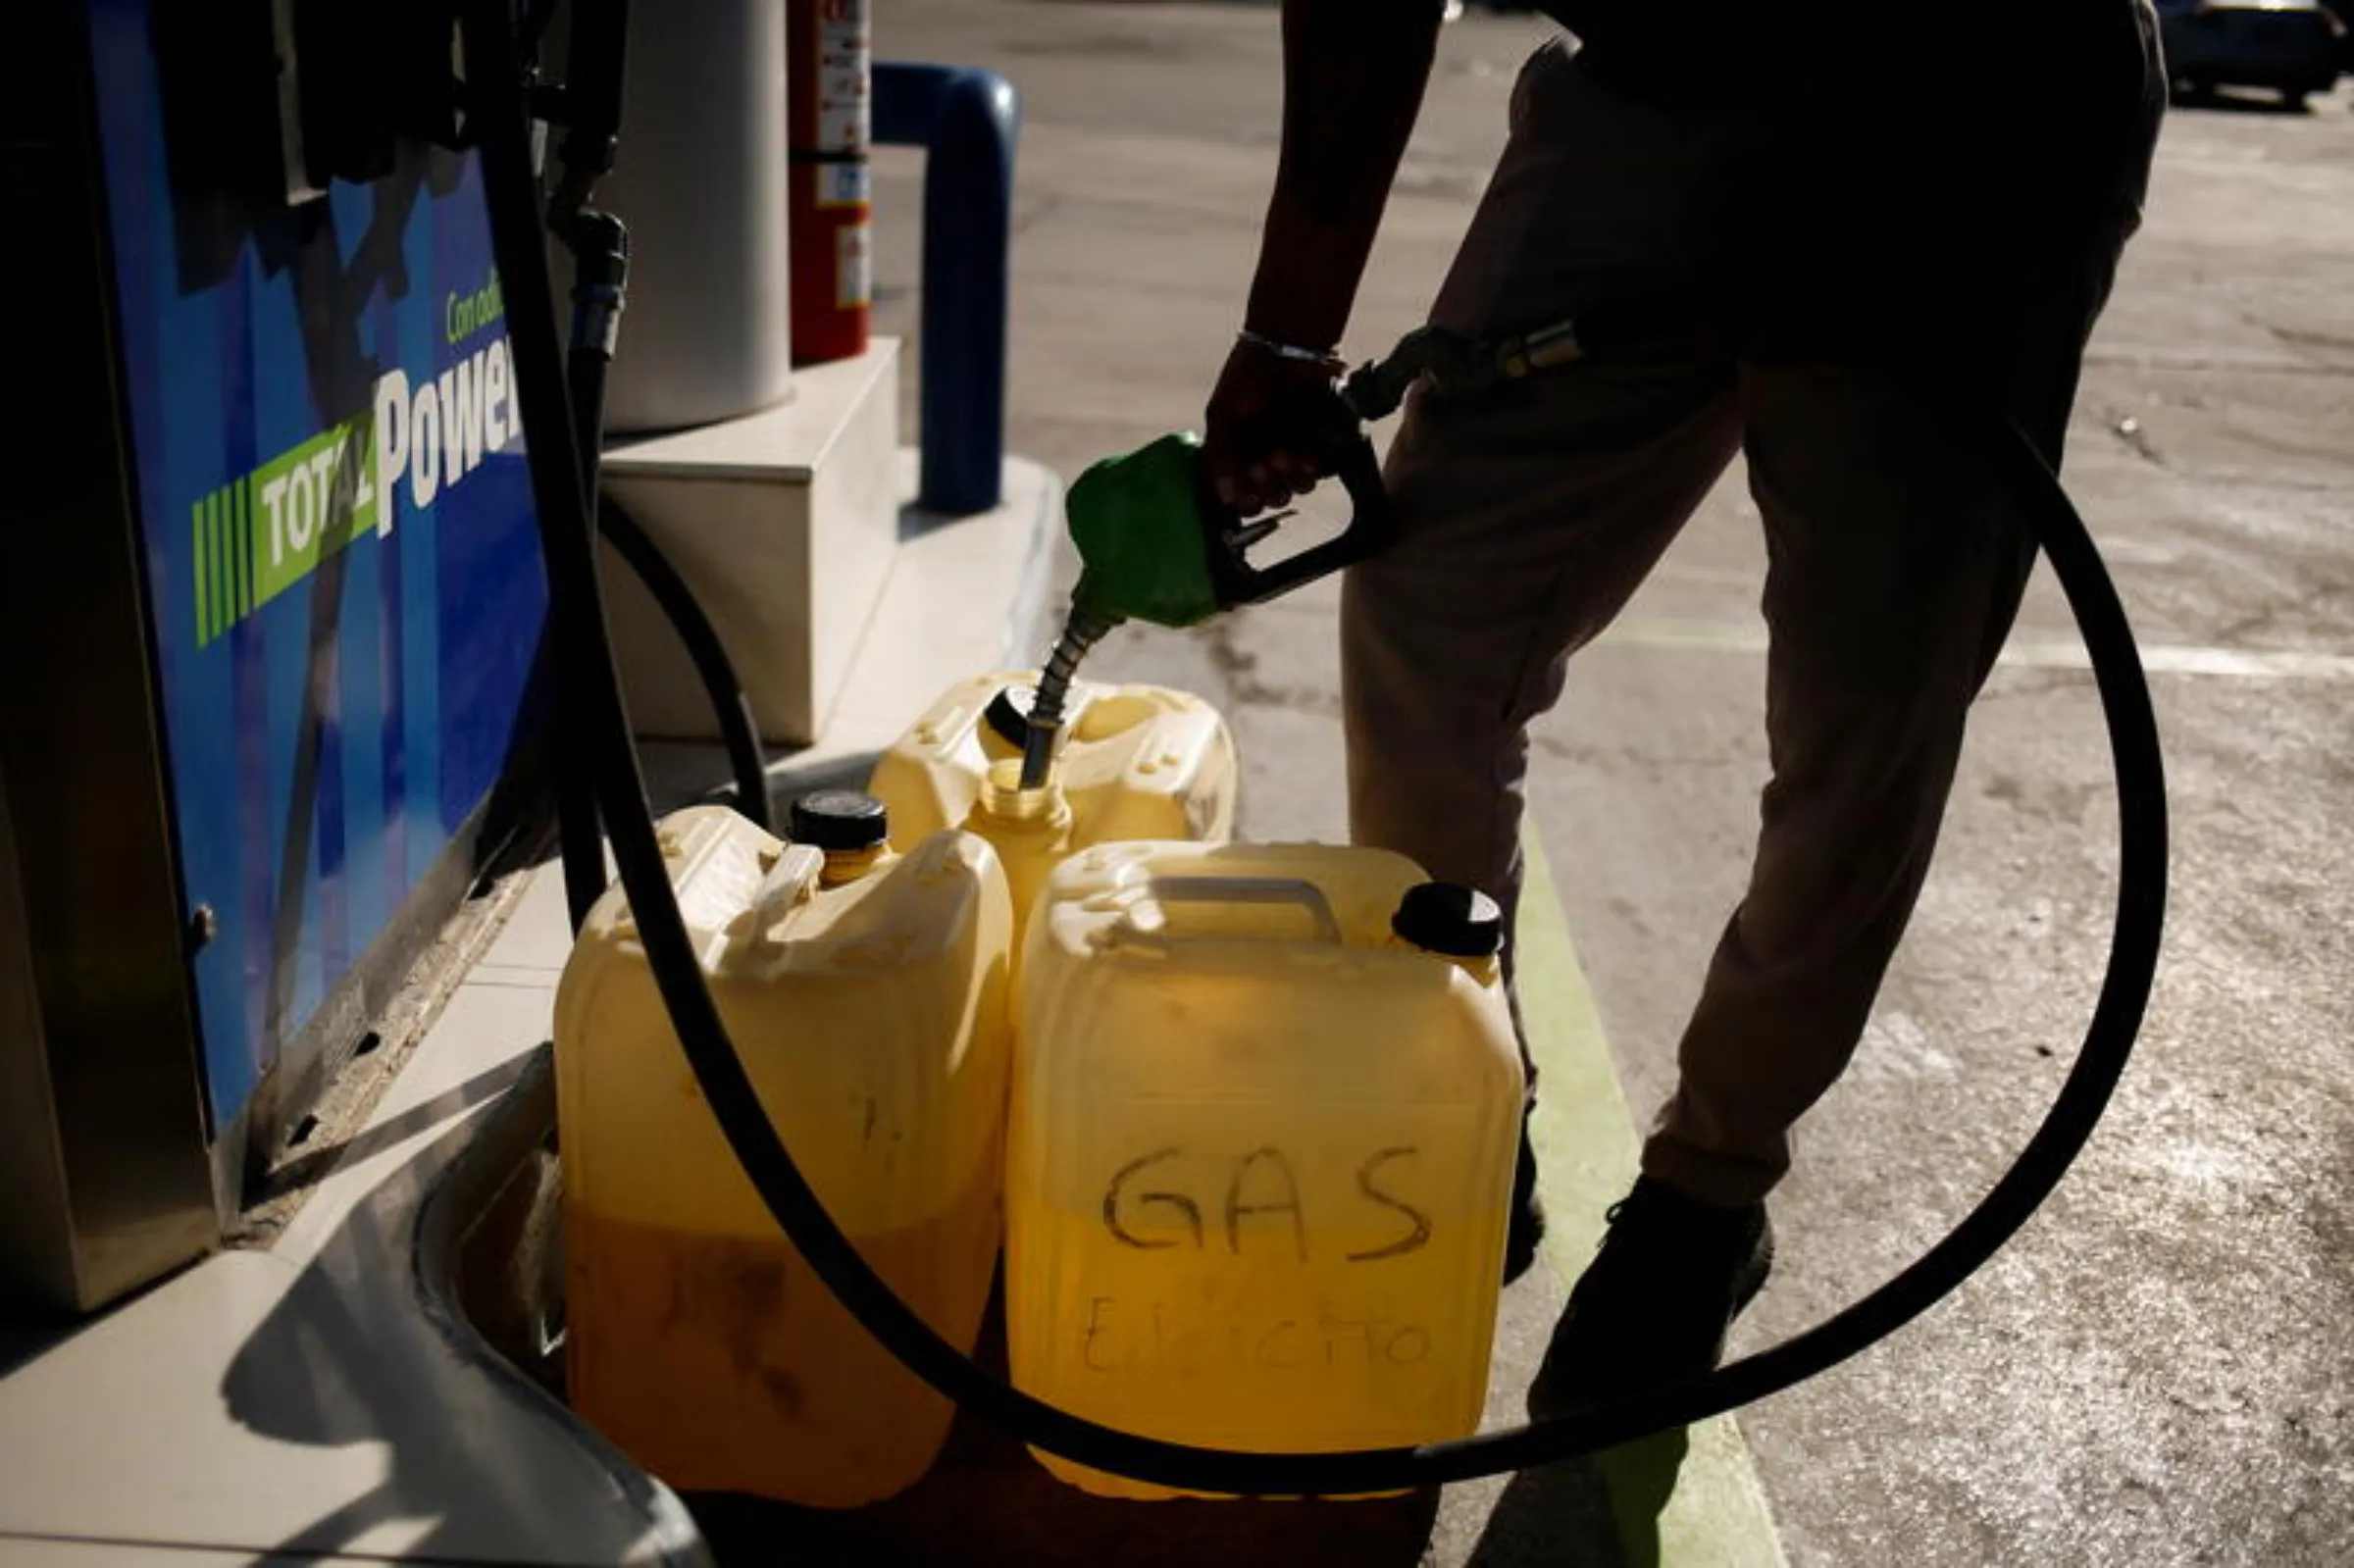 A man fills plastic containers with gasoline at a service station after Mexico suspended the gasoline subsidy along the U.S. border, in Ciudad Juarez, Mexico, April 4, 2022. REUTERS/Jose Luis Gonzalez